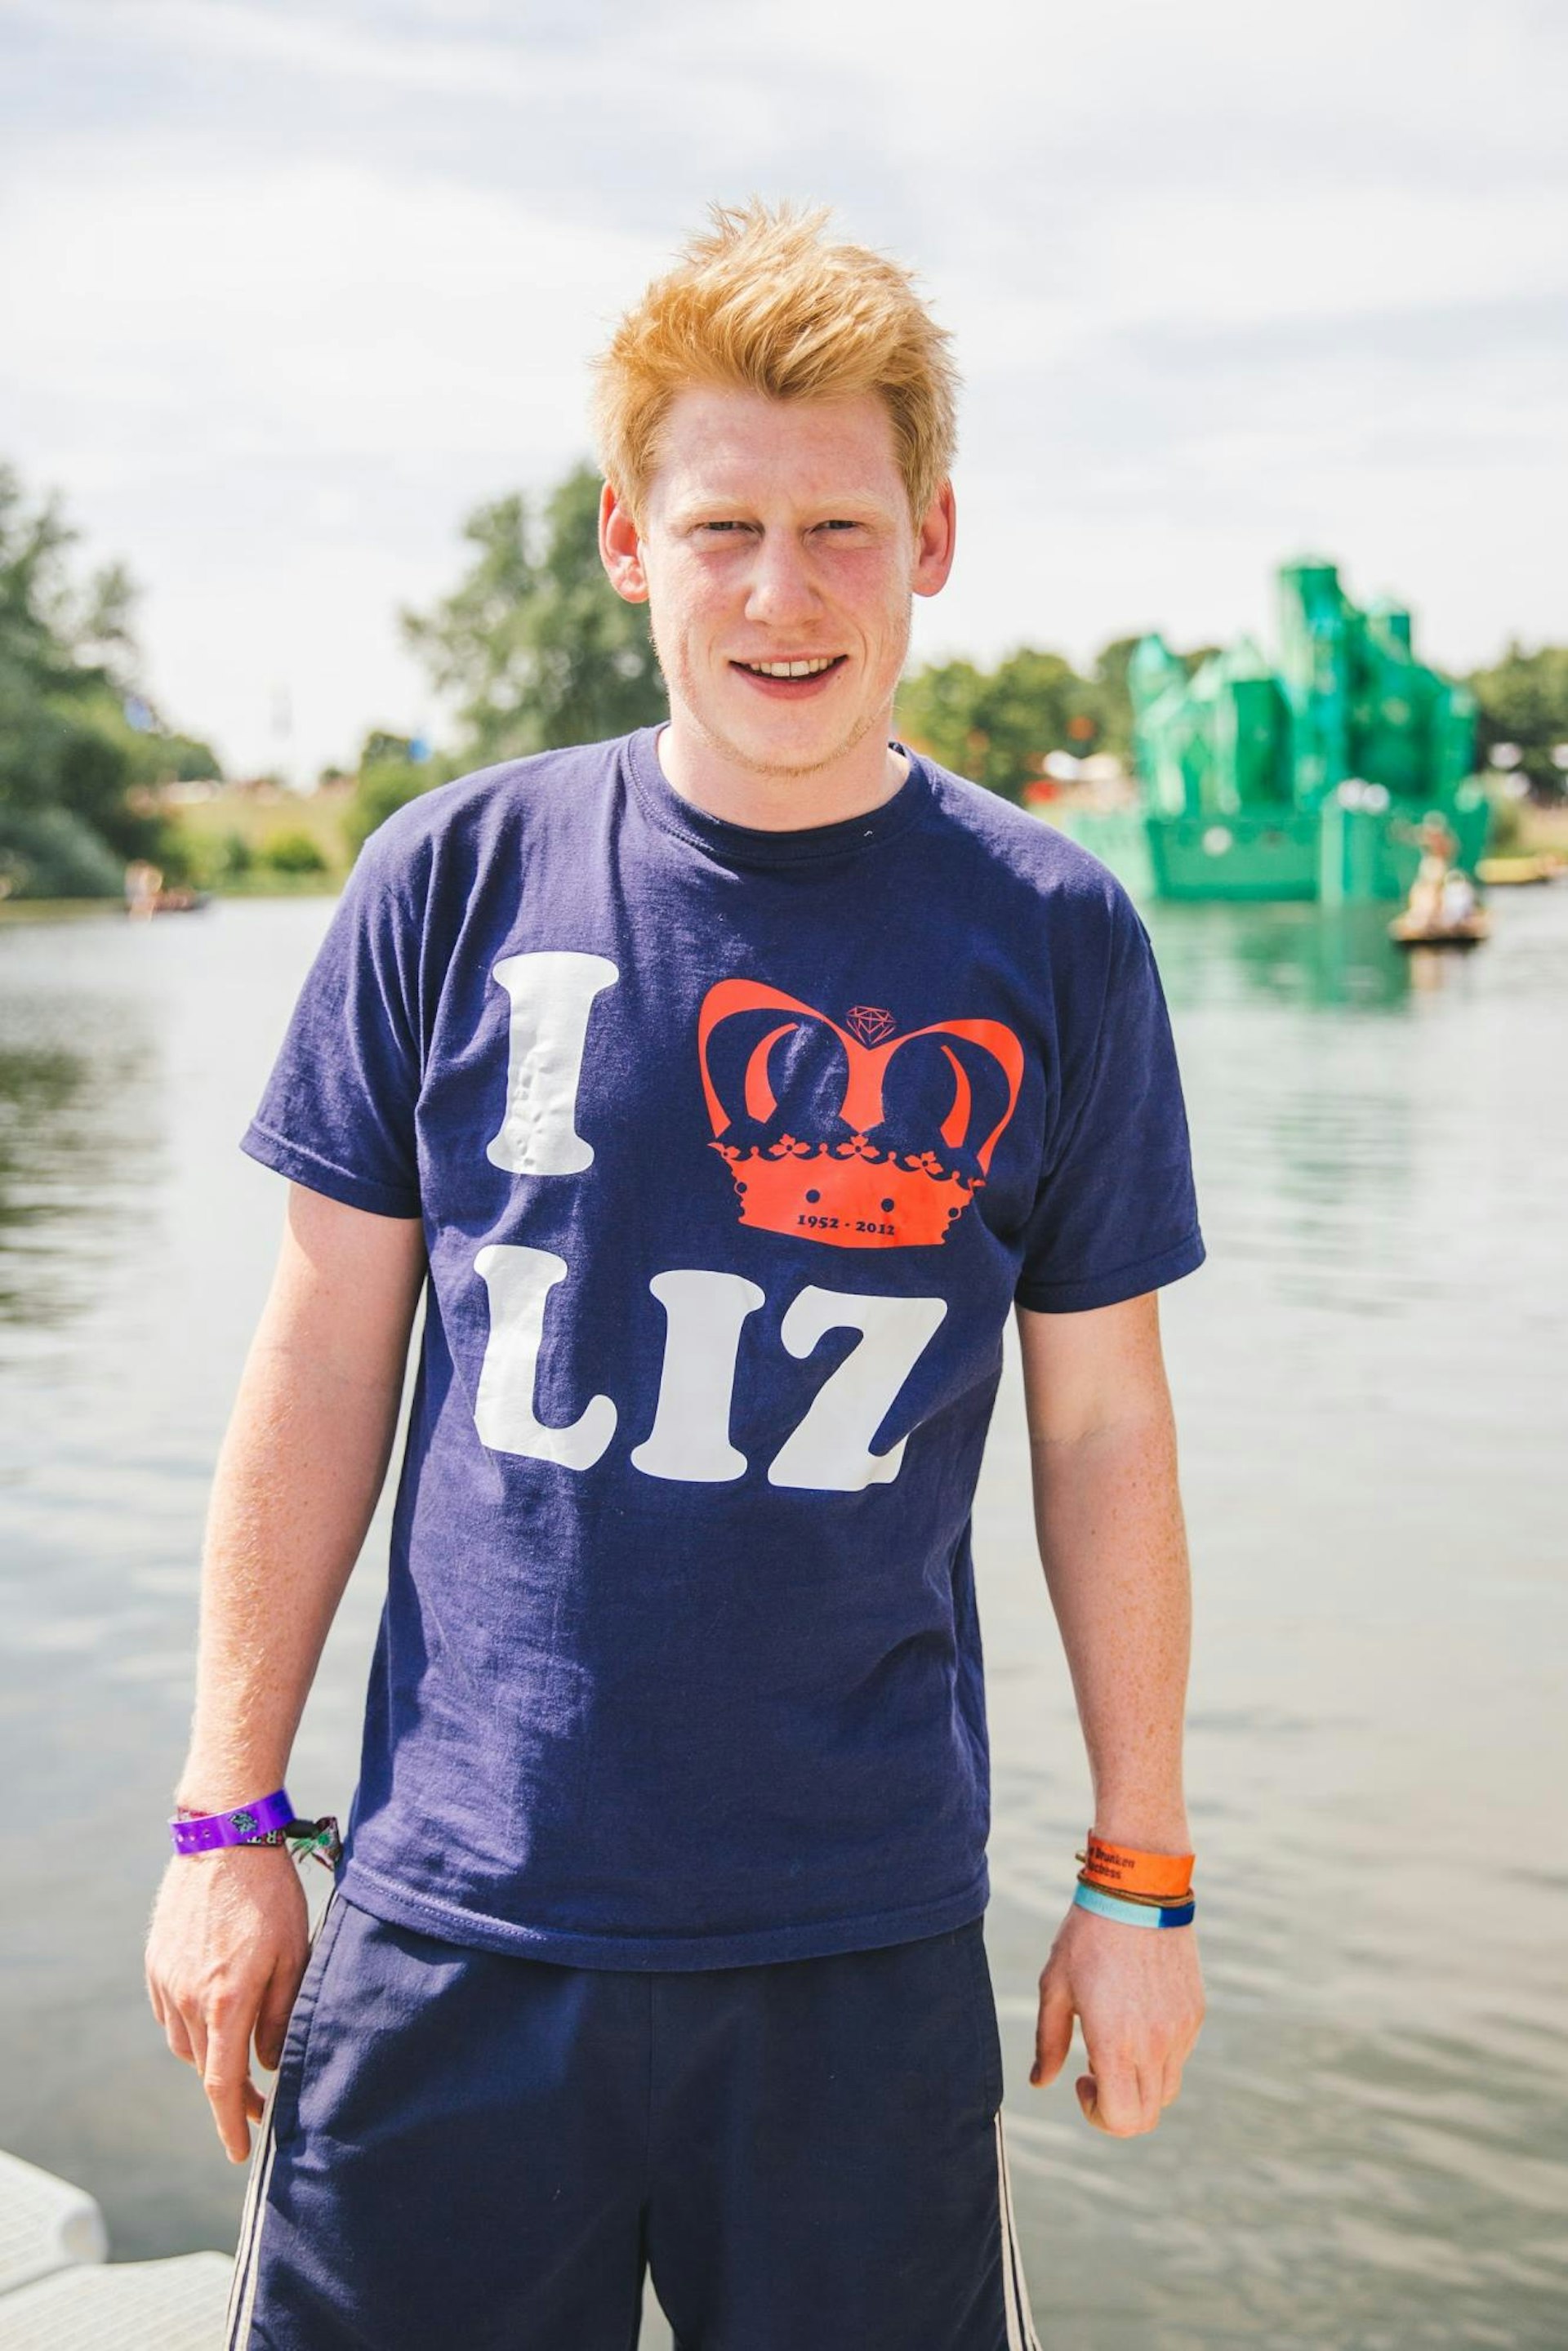 One of the many, many “Prince Harry” appearances at Secret Garden Party through the years. 